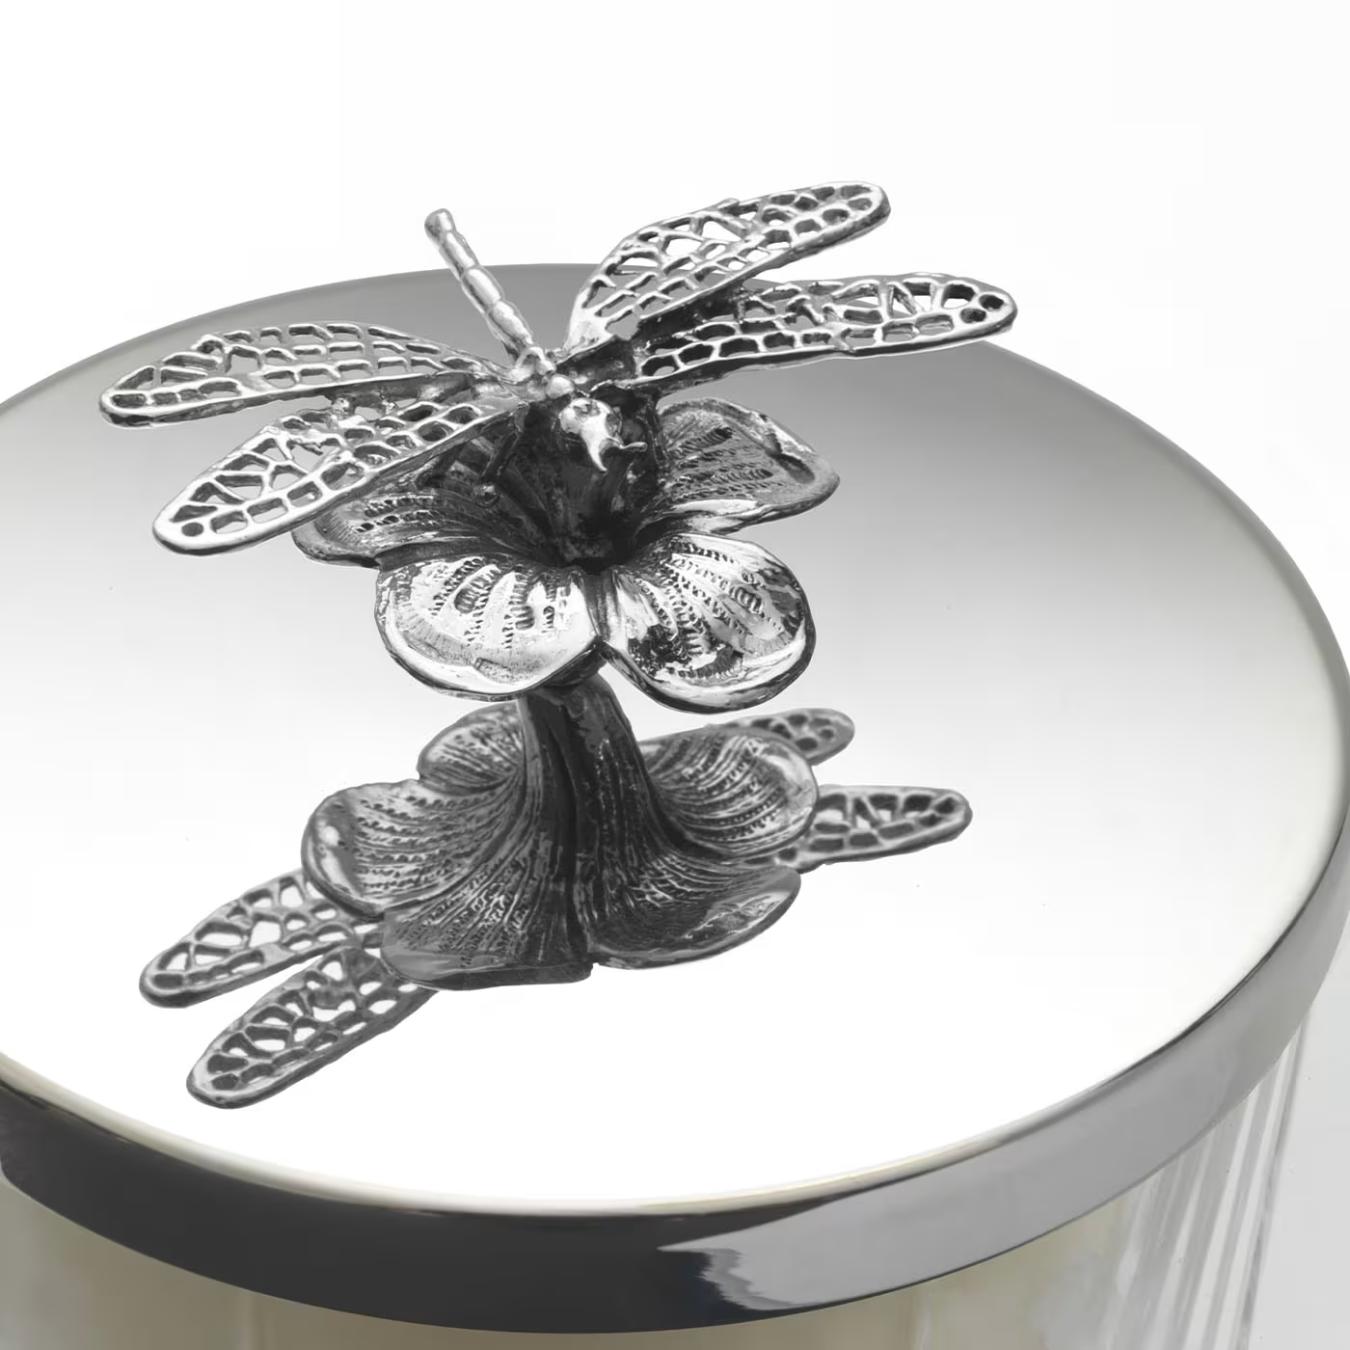 Spring Dragonfly Silver Candle Vase